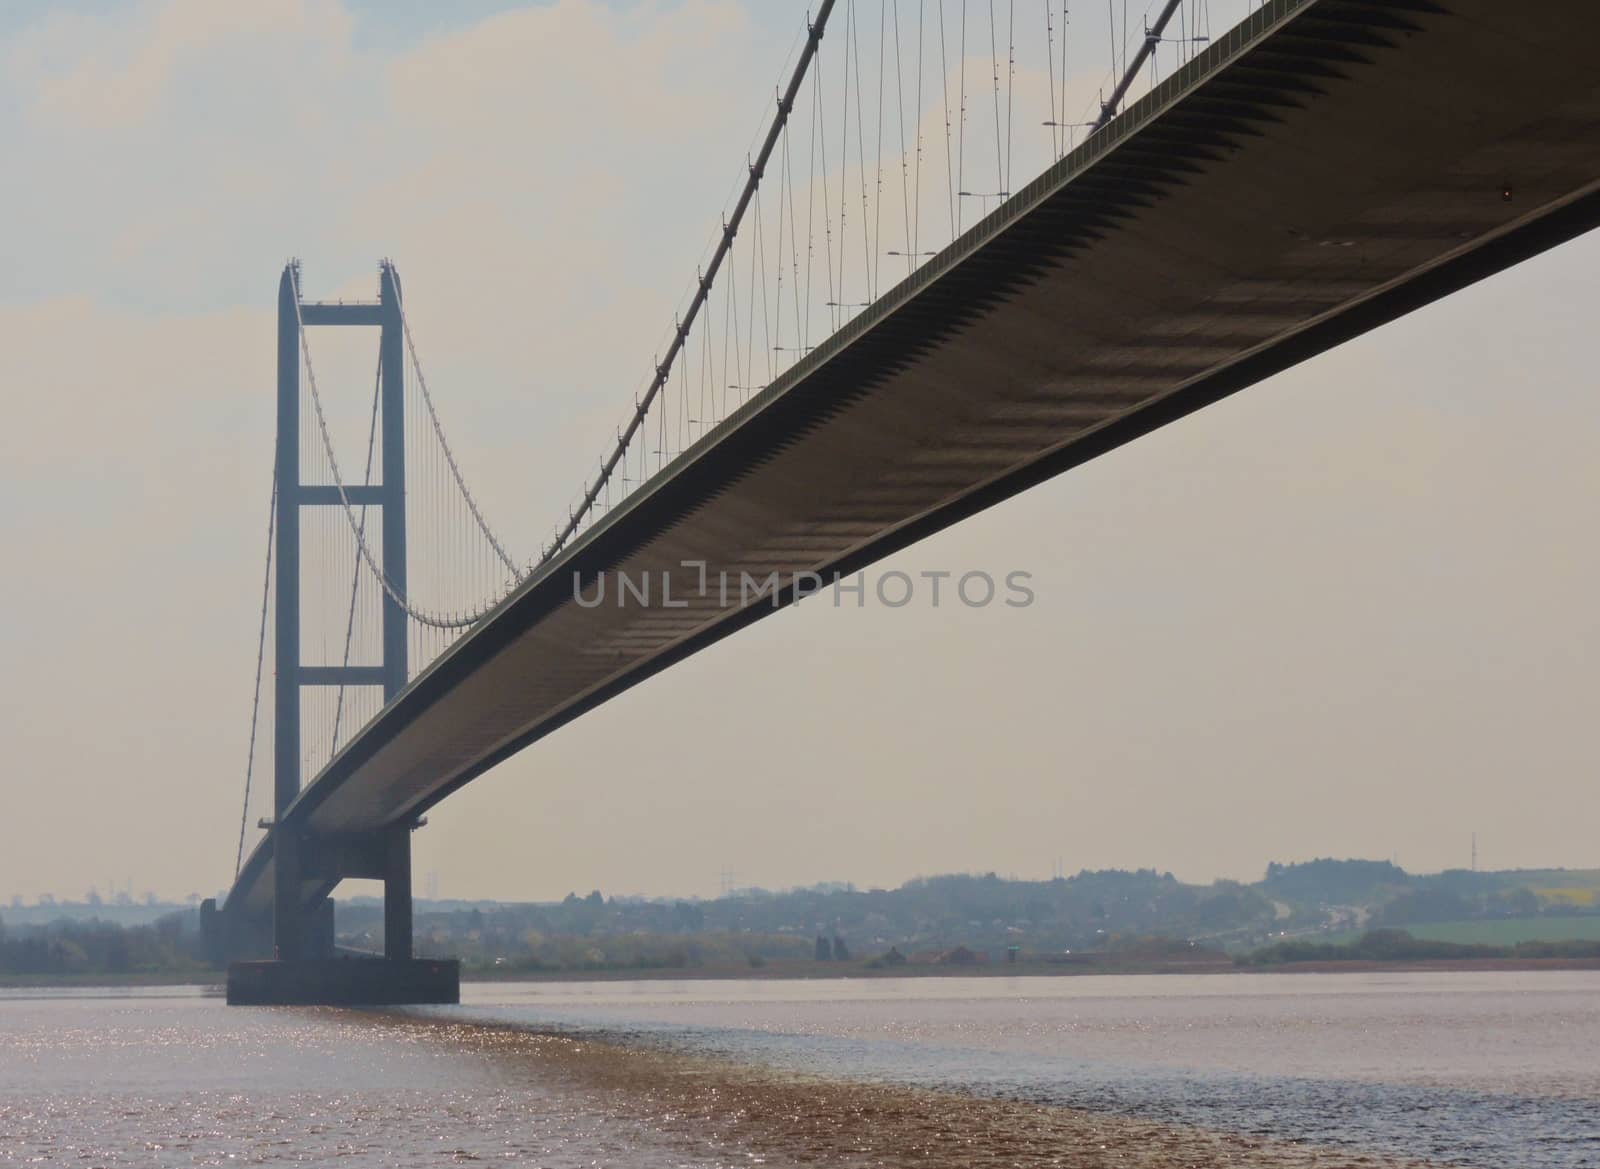 An image of the Humber Suspension Bridge in Yorkshire, England.